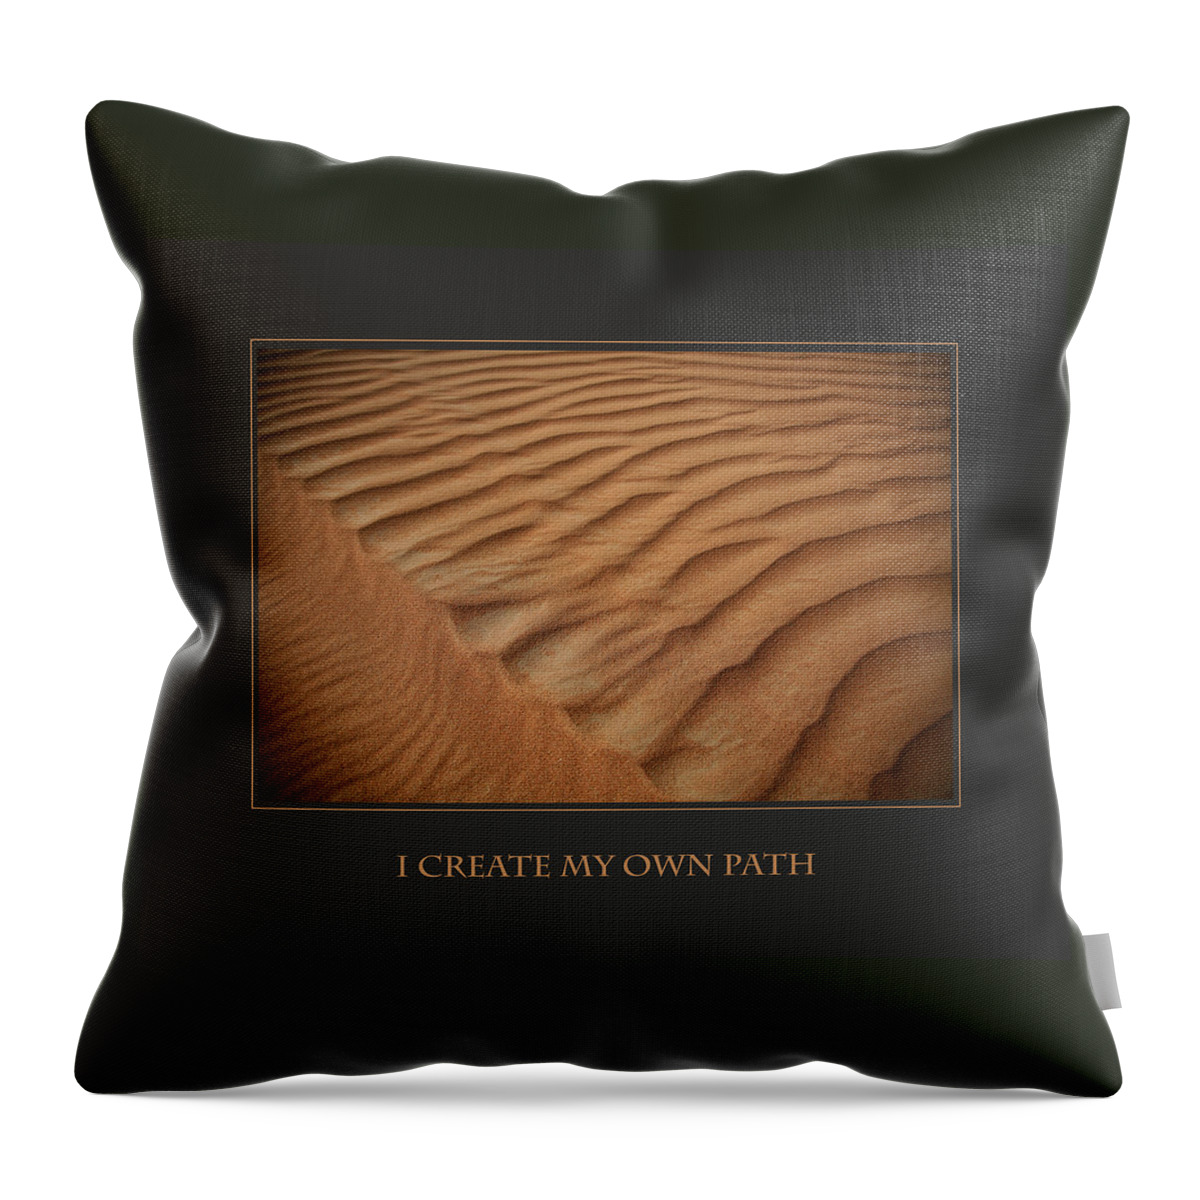 Motivational Throw Pillow featuring the photograph I Create My Own Path by Donna Corless